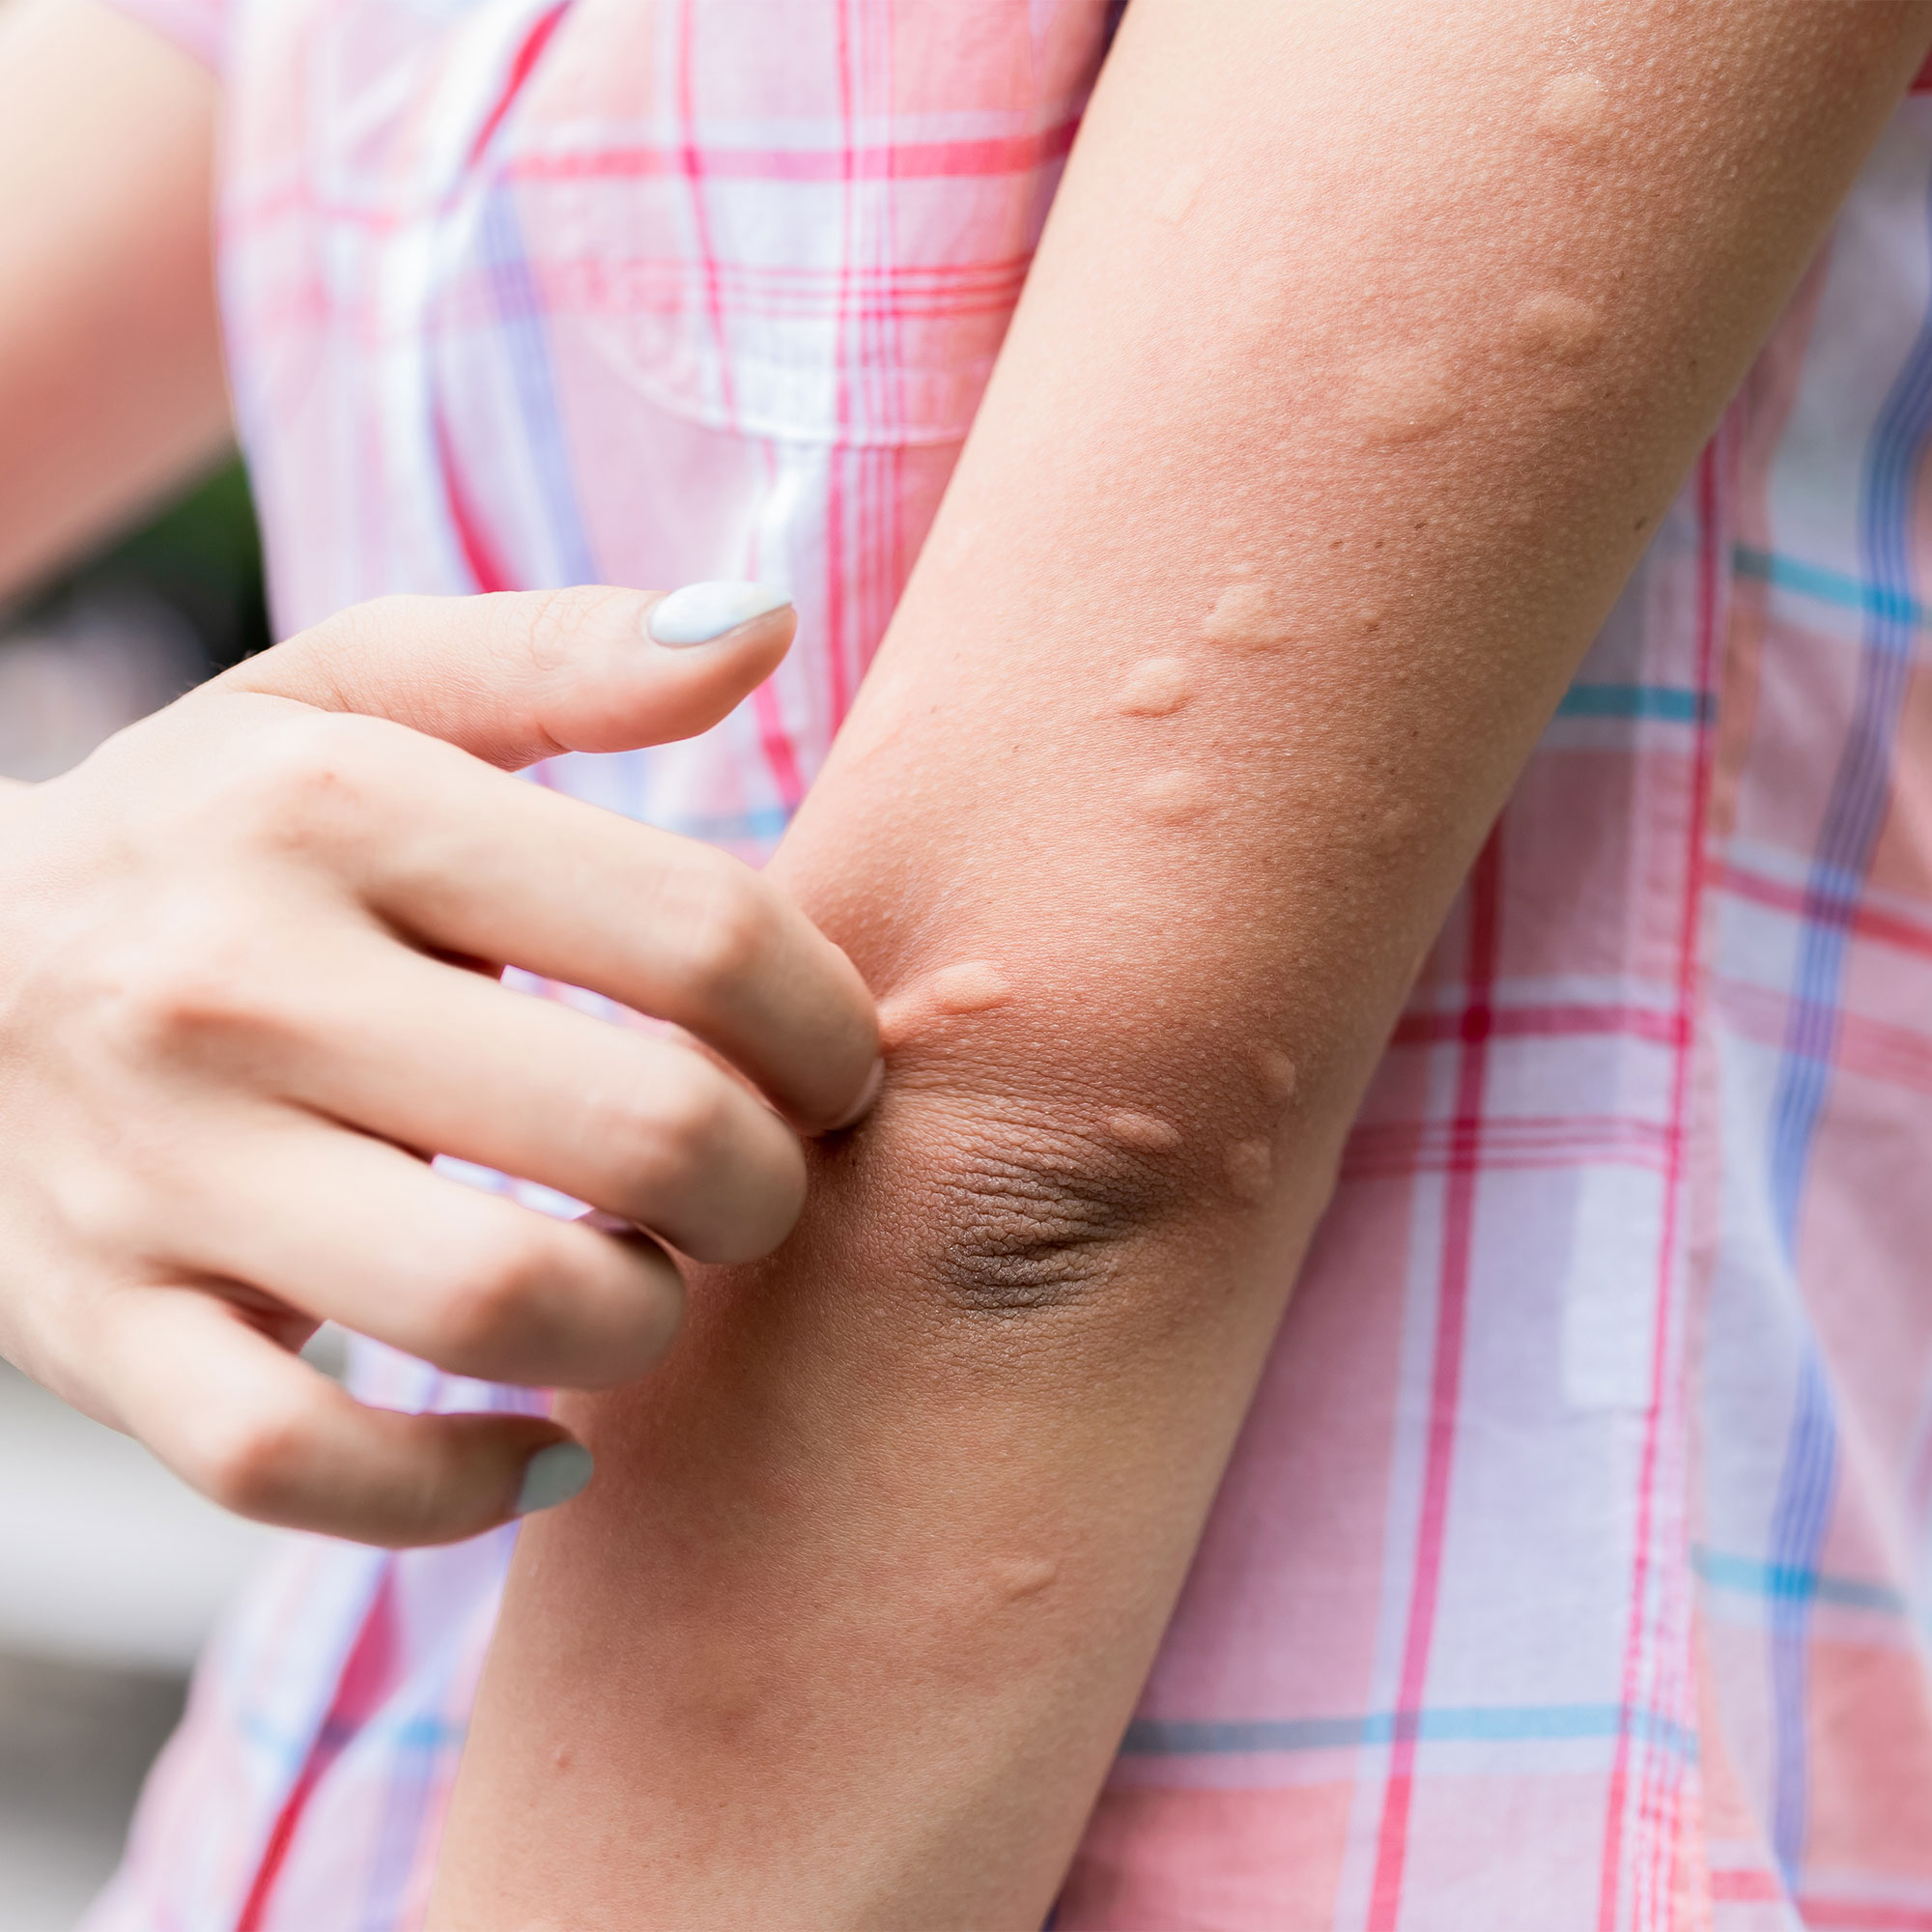 How to Tell the Difference Between Bug Bites, Heat Rash, and Hives